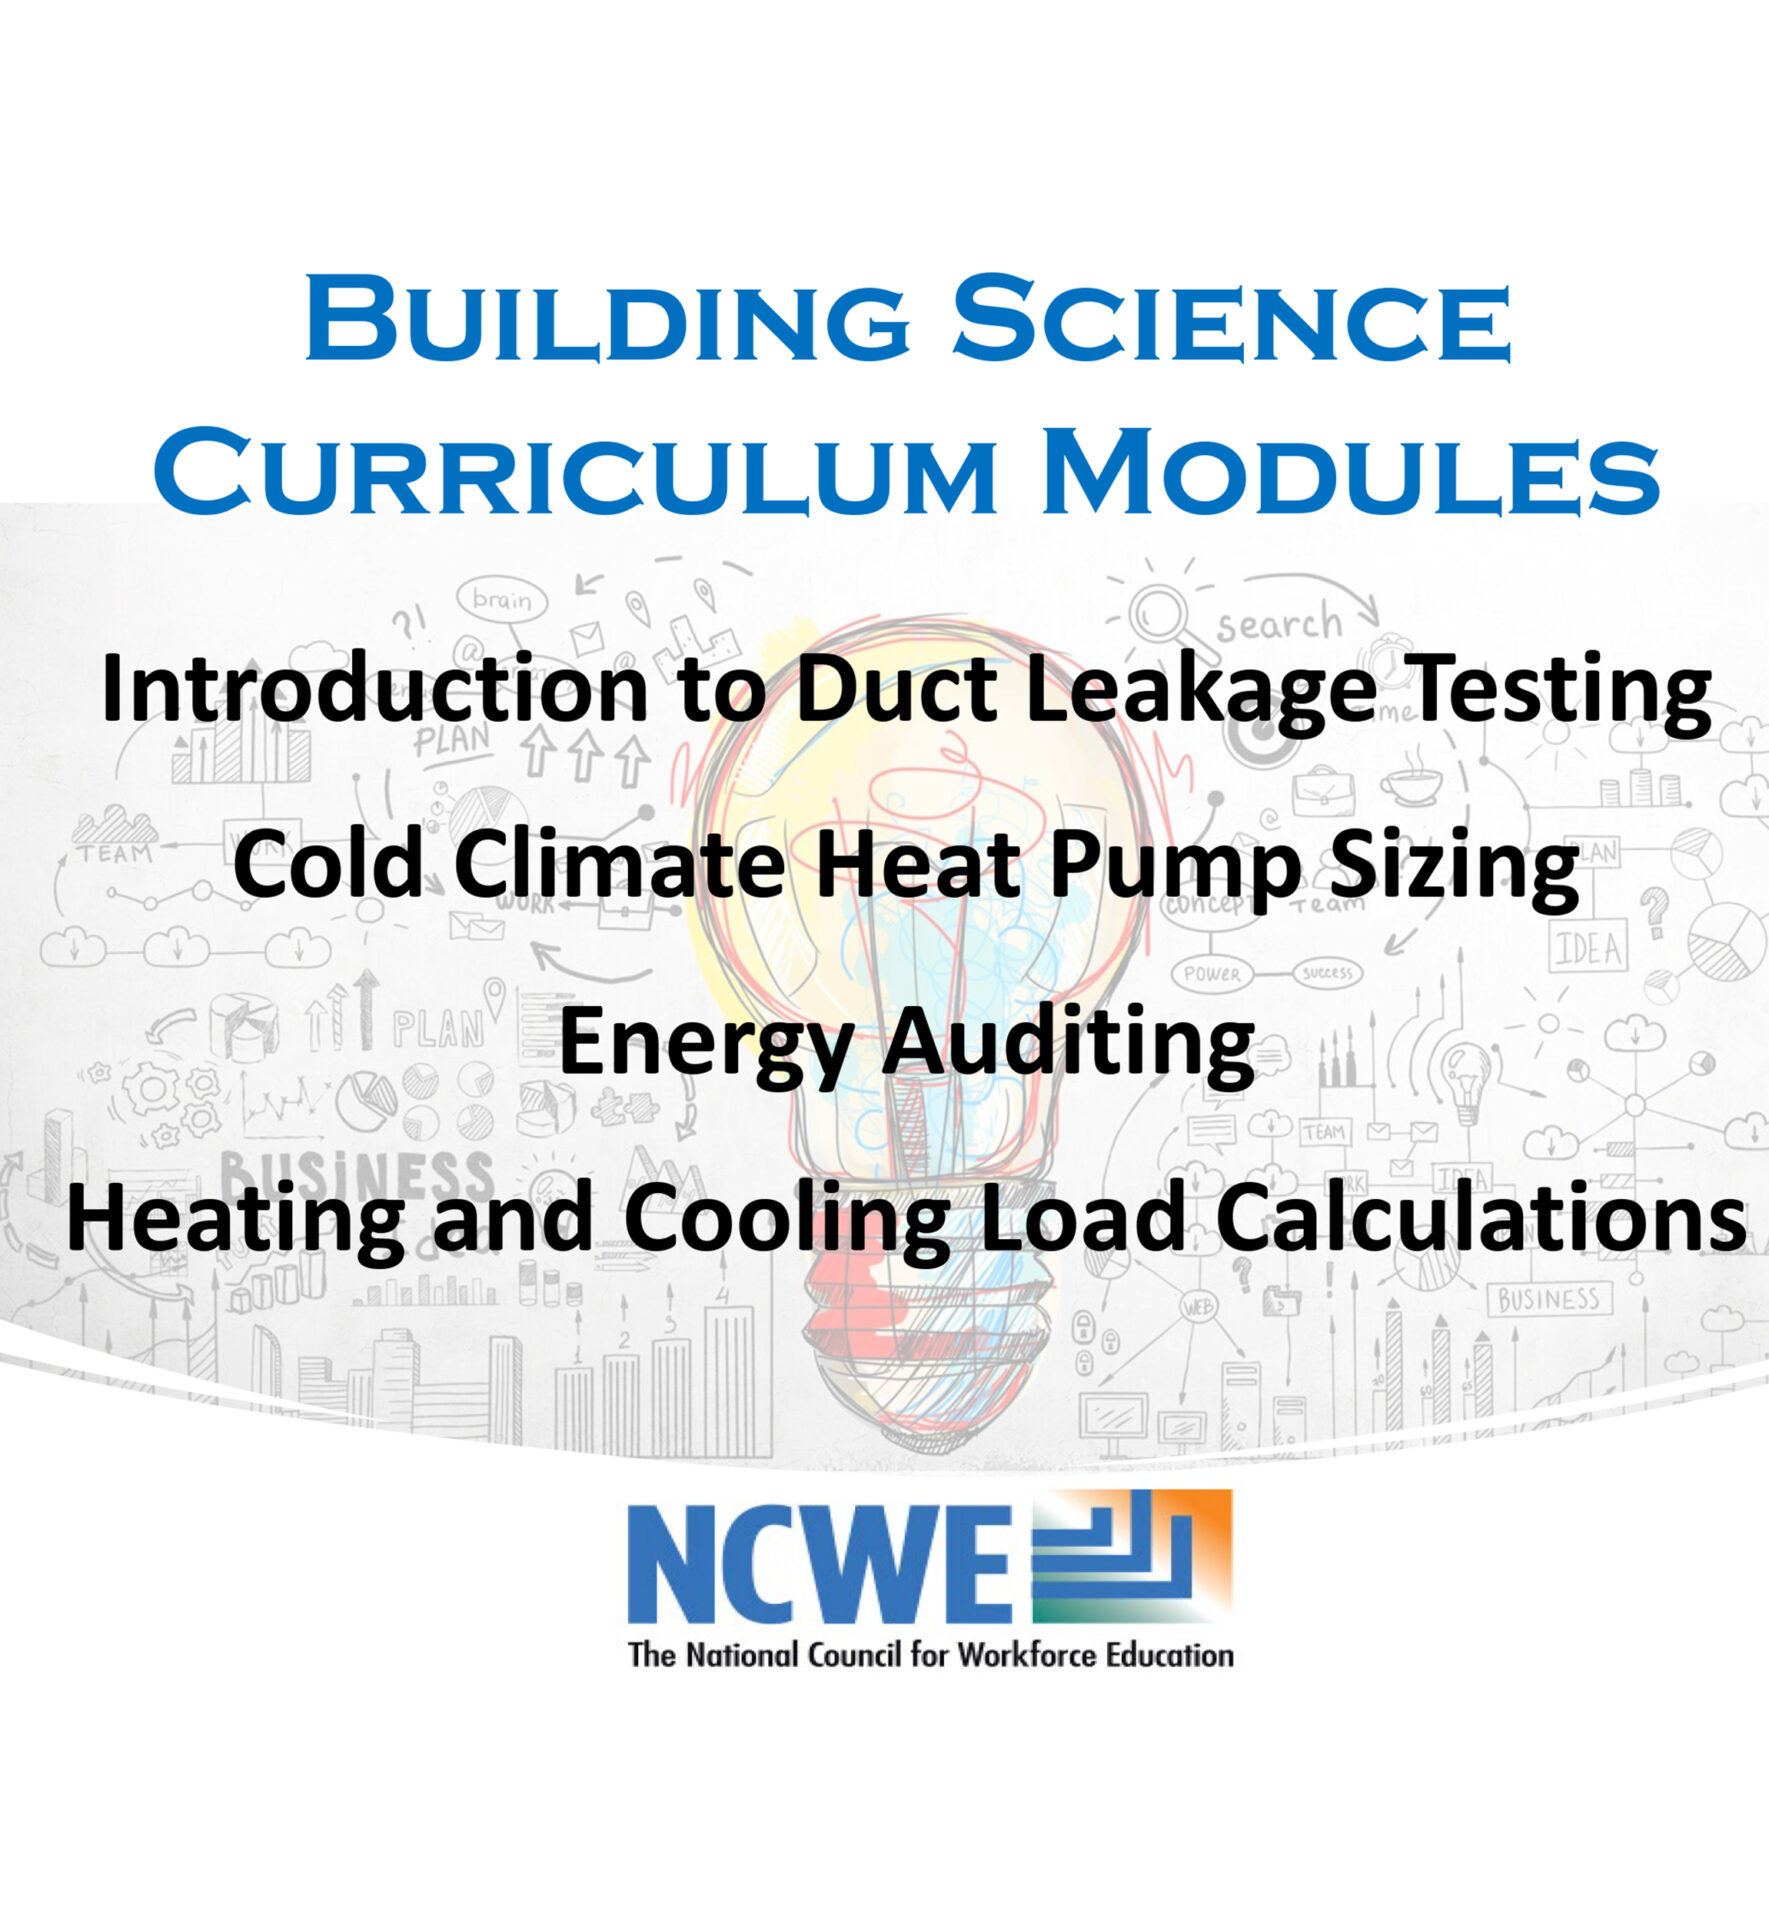 Building Sciences Curriculum Modules List and Link